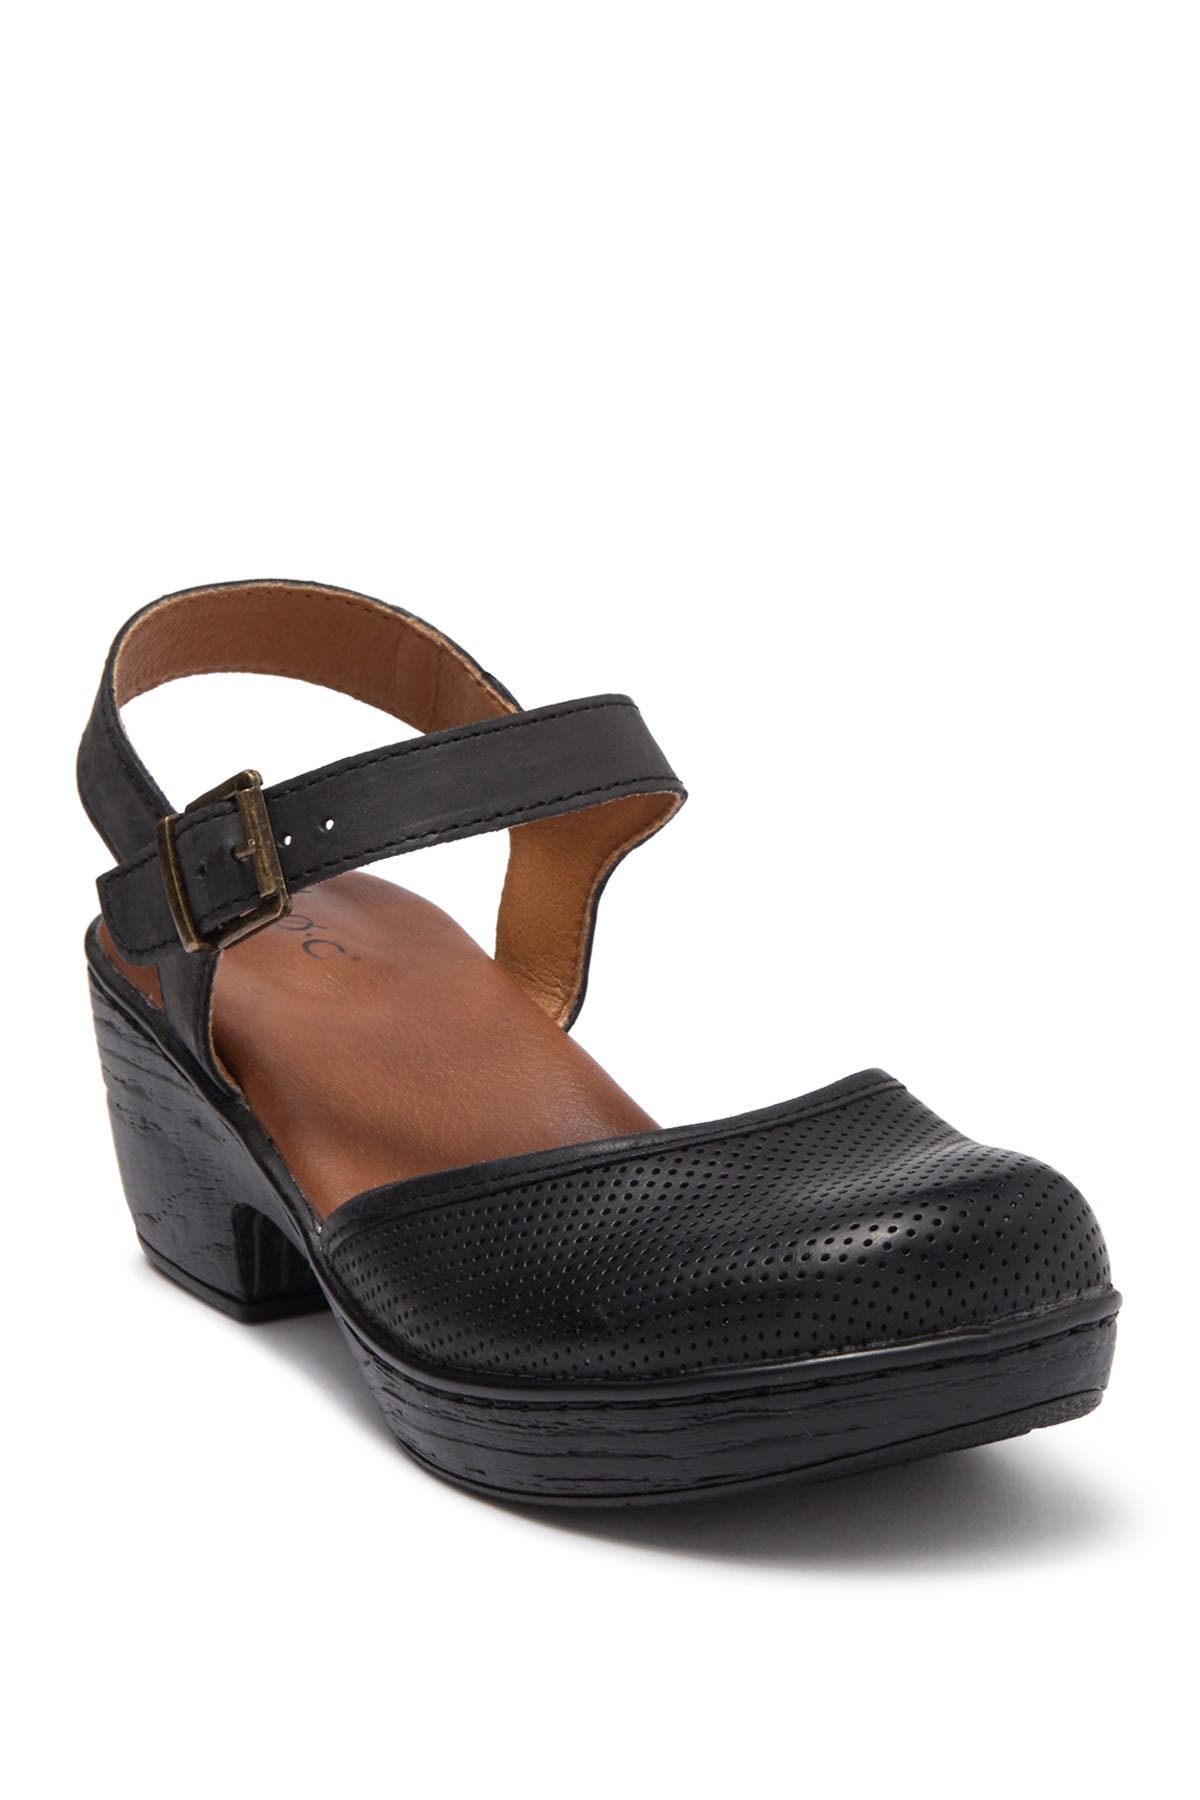 B.O.C. BY BORN | Stone Perforated Clog 